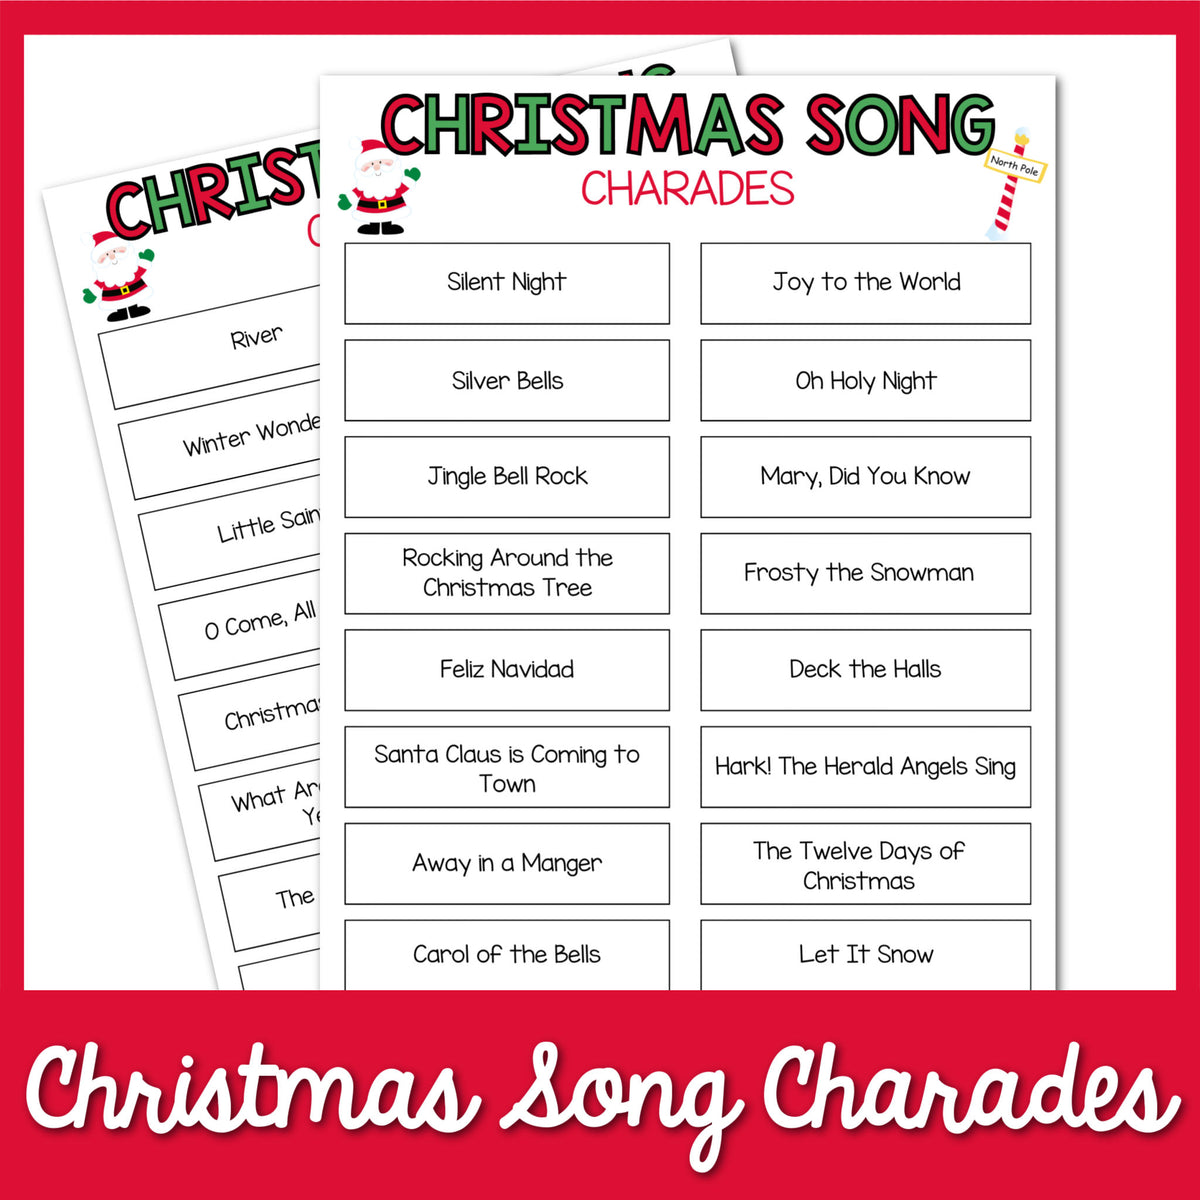 Song titles for charades 2019